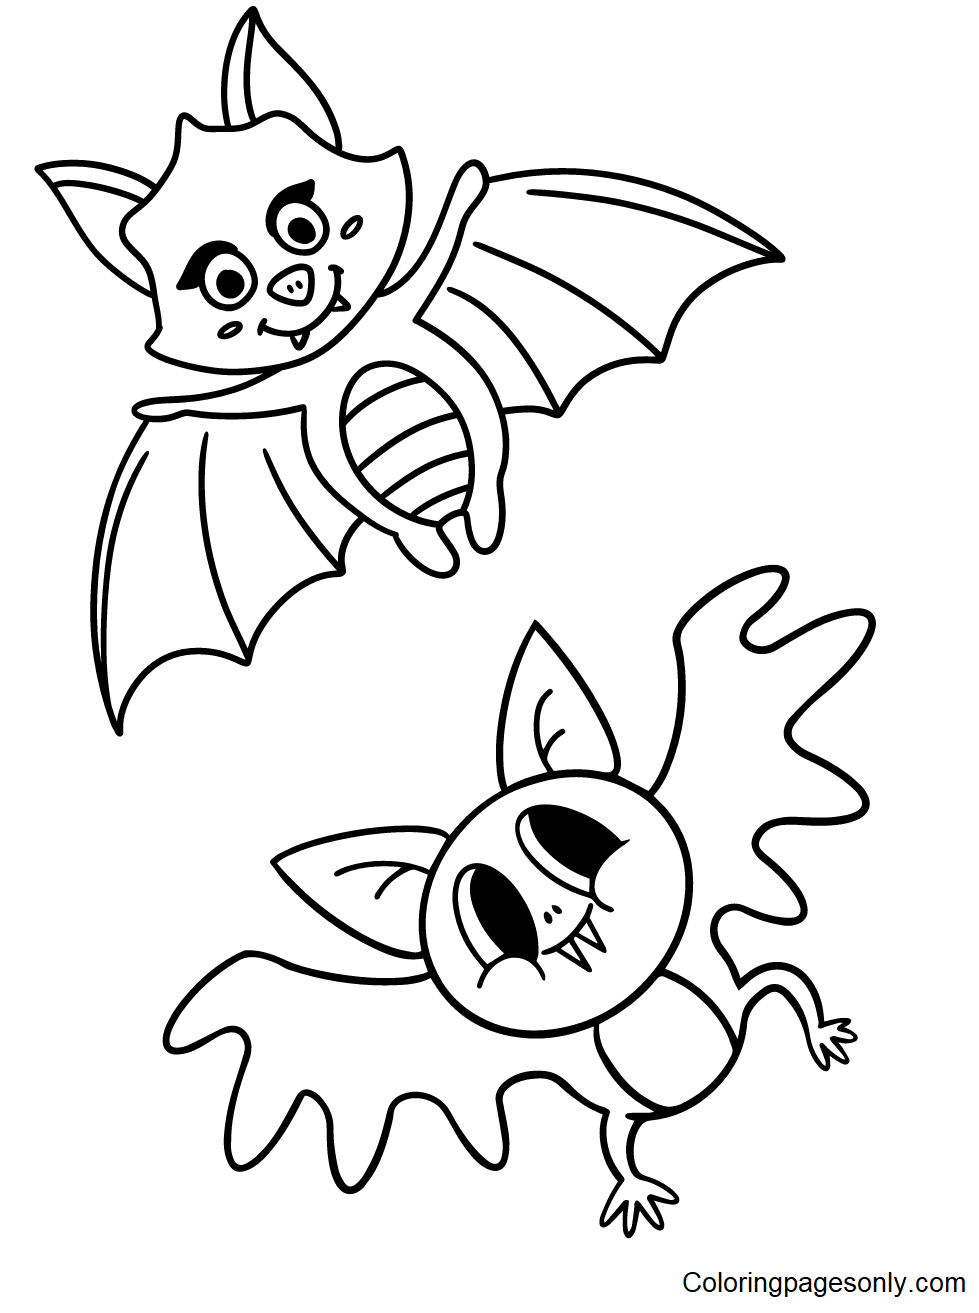 Two Bats Coloring Page